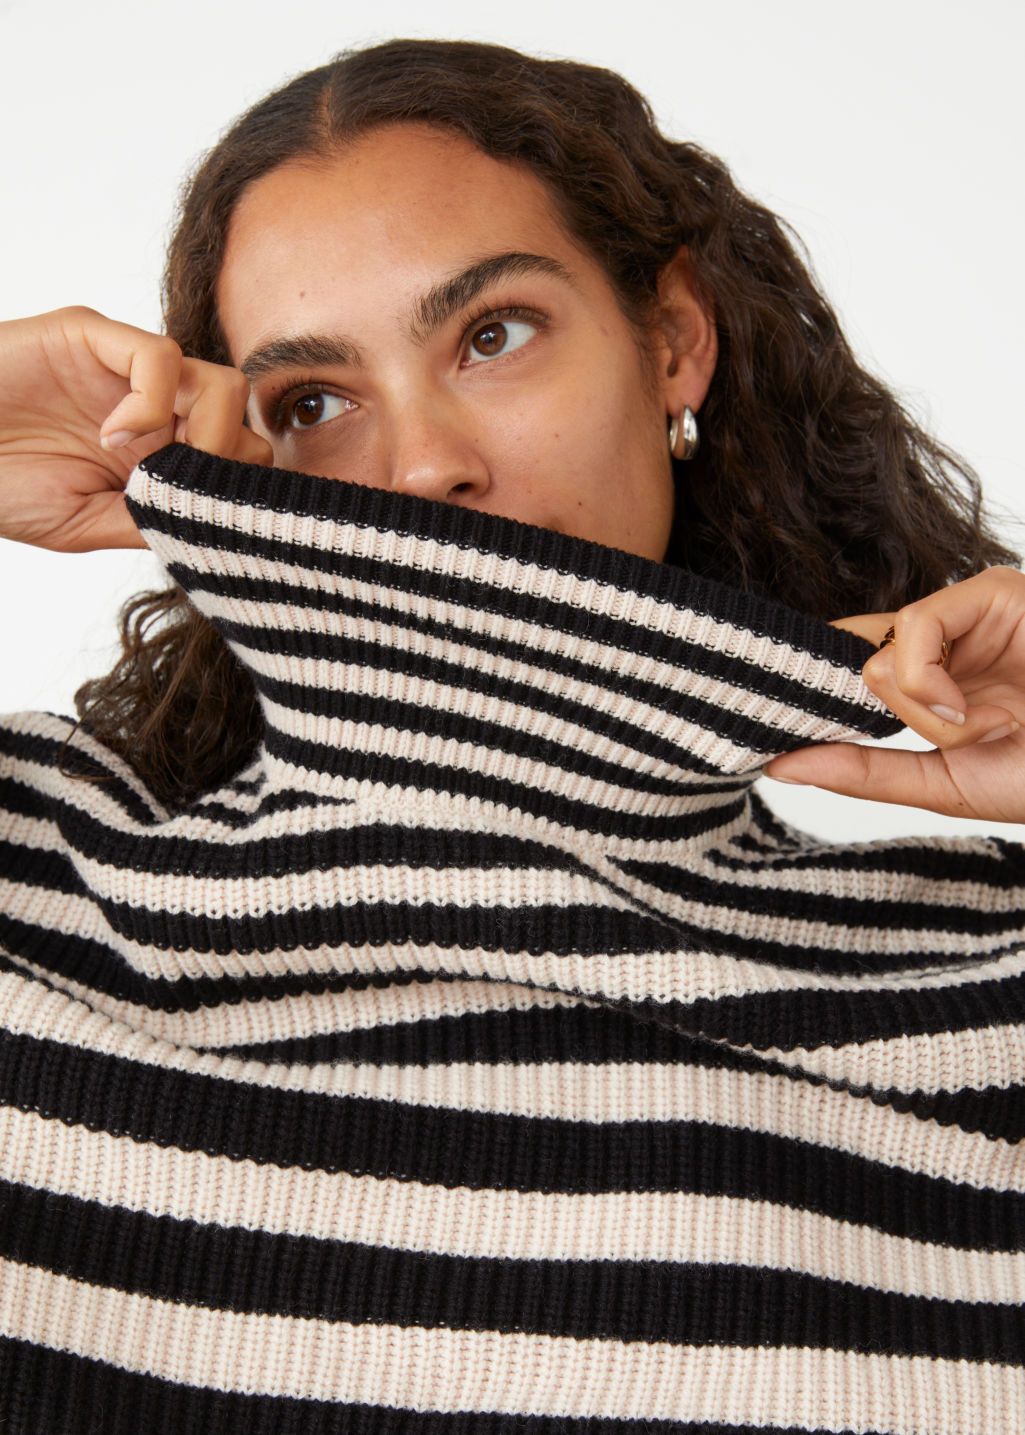 Turtleneck Knit Sweater | & Other Stories US